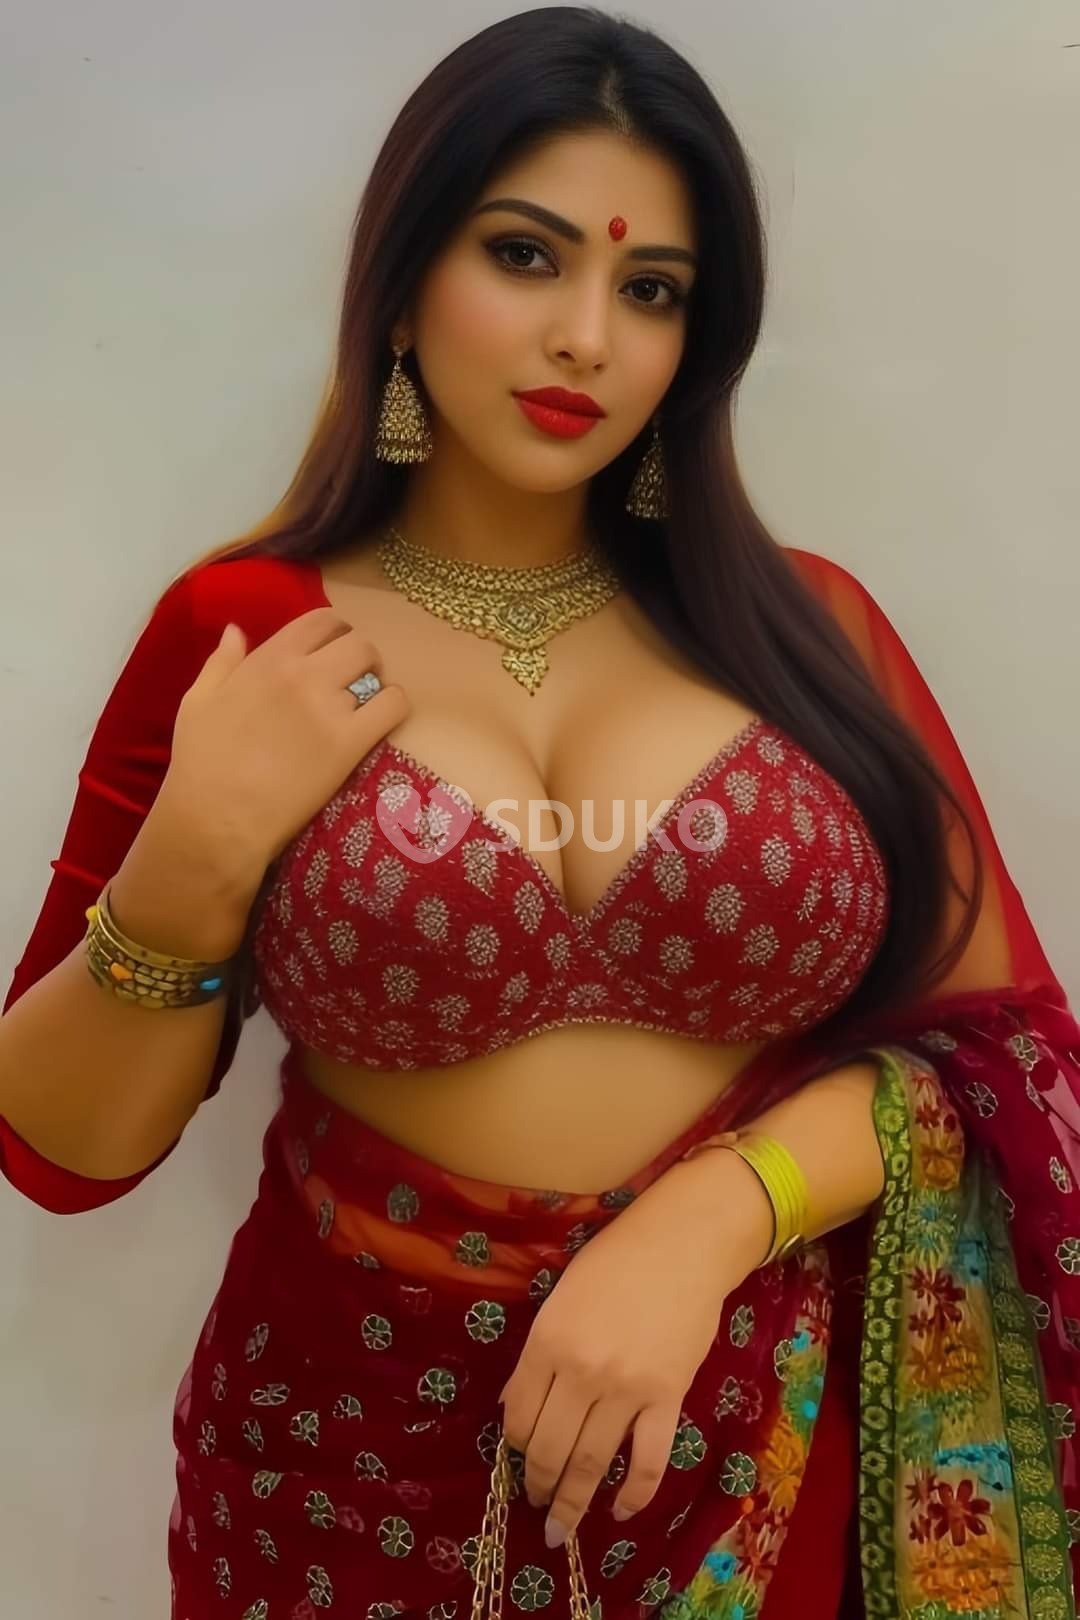 Ms Mona Singh available in Lucknow 💕 Payment cash